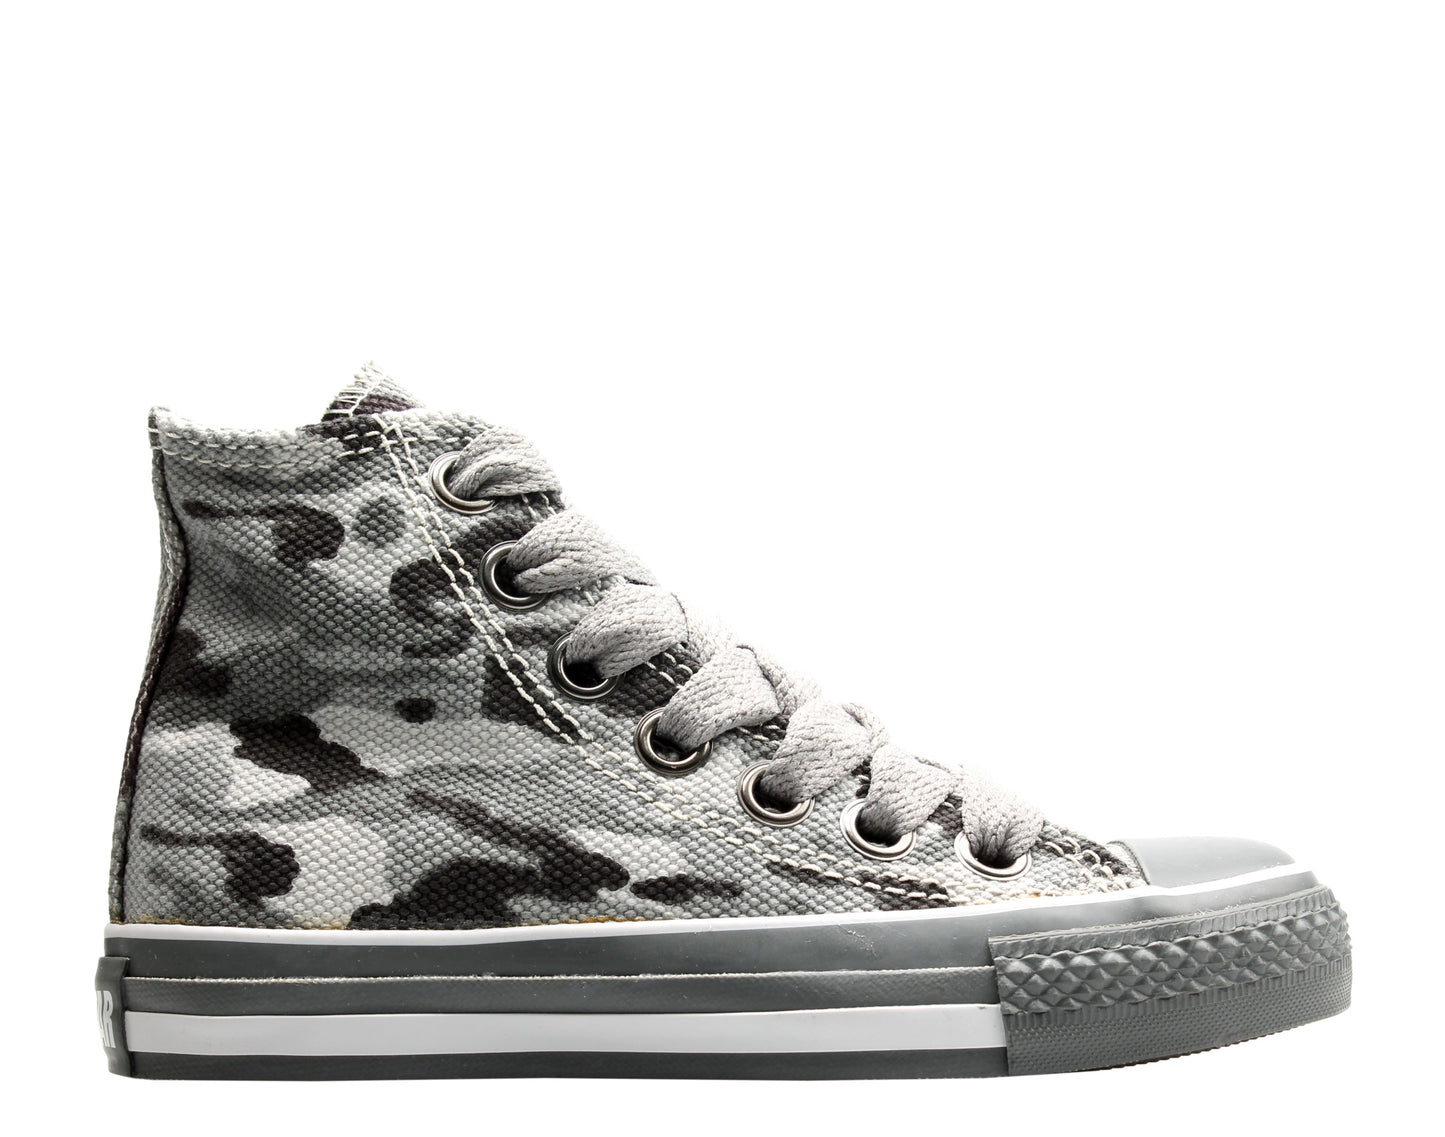 Converse Chuck Taylor All Star Camo Black/Charcoal Grey High Top Sneakers 100299